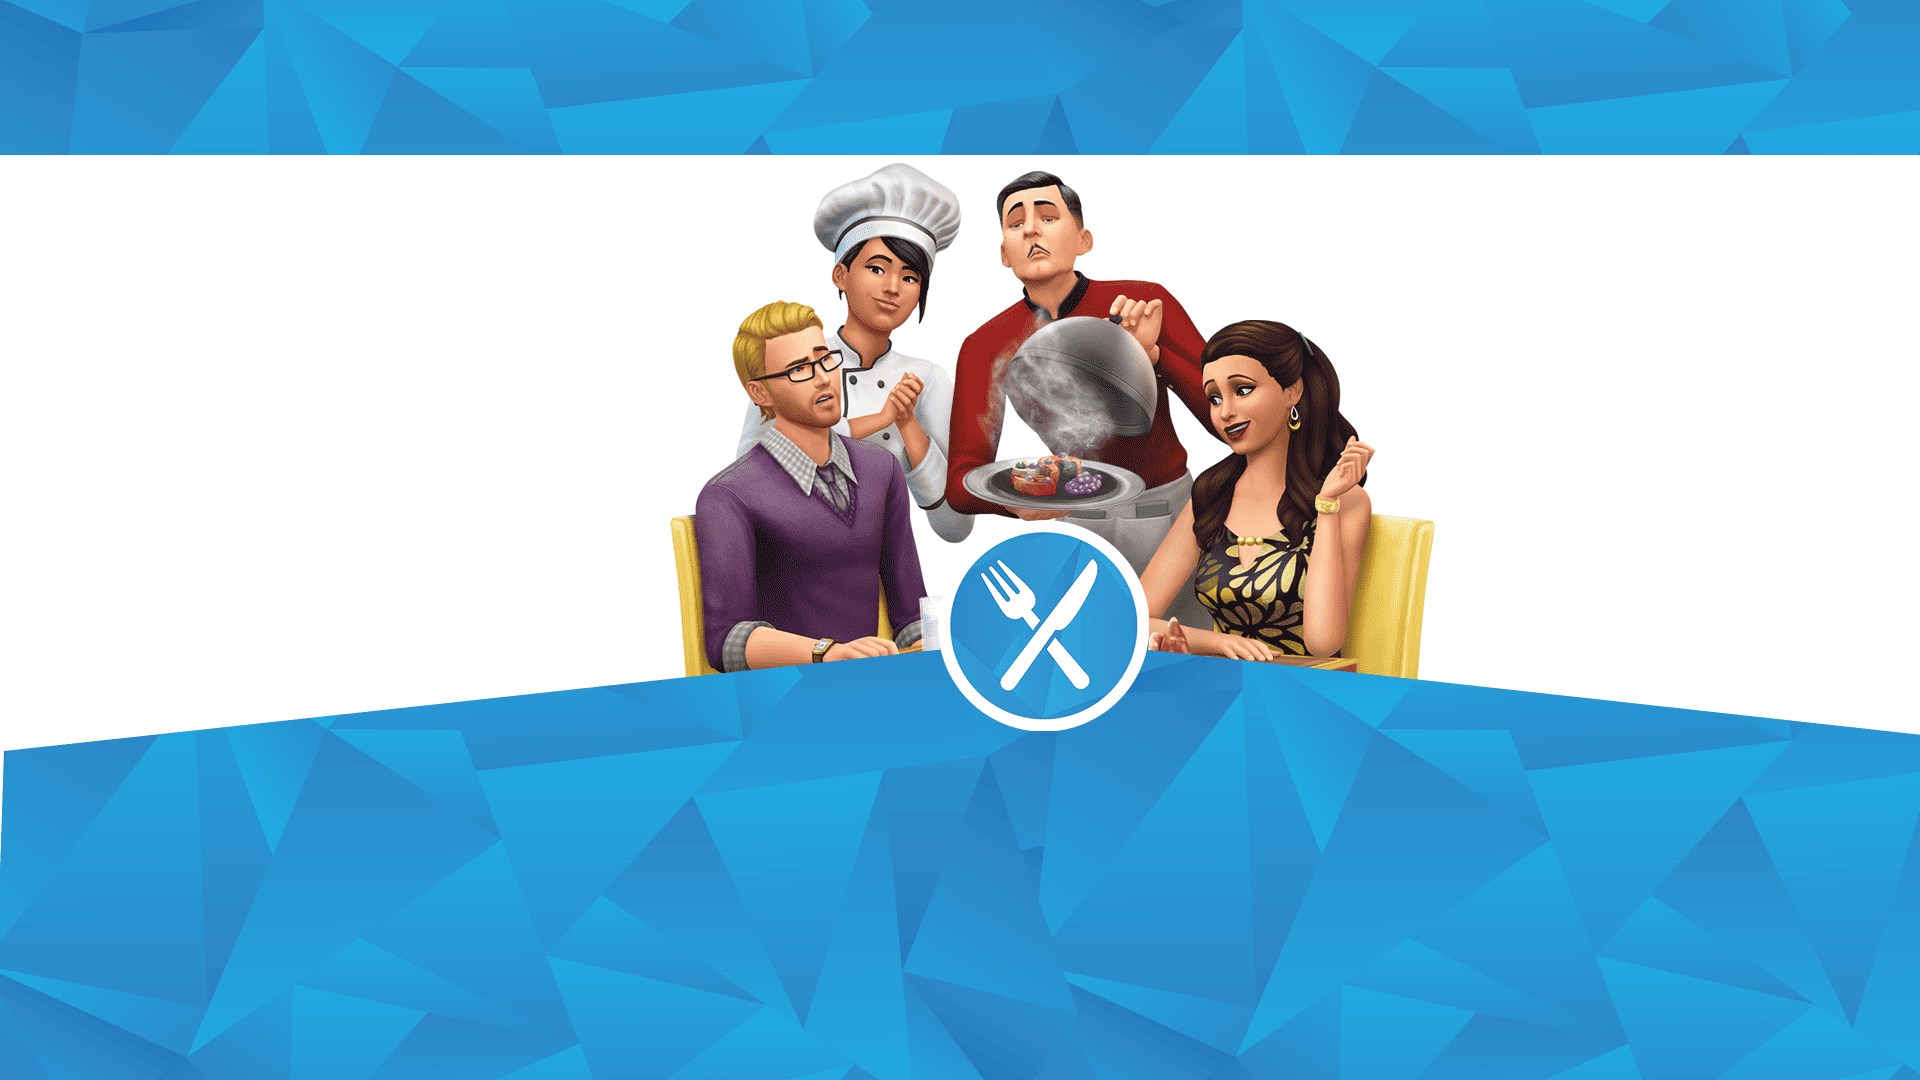 Sims 4 Cheats, Cheat Codes, and Walkthroughs For Your PC